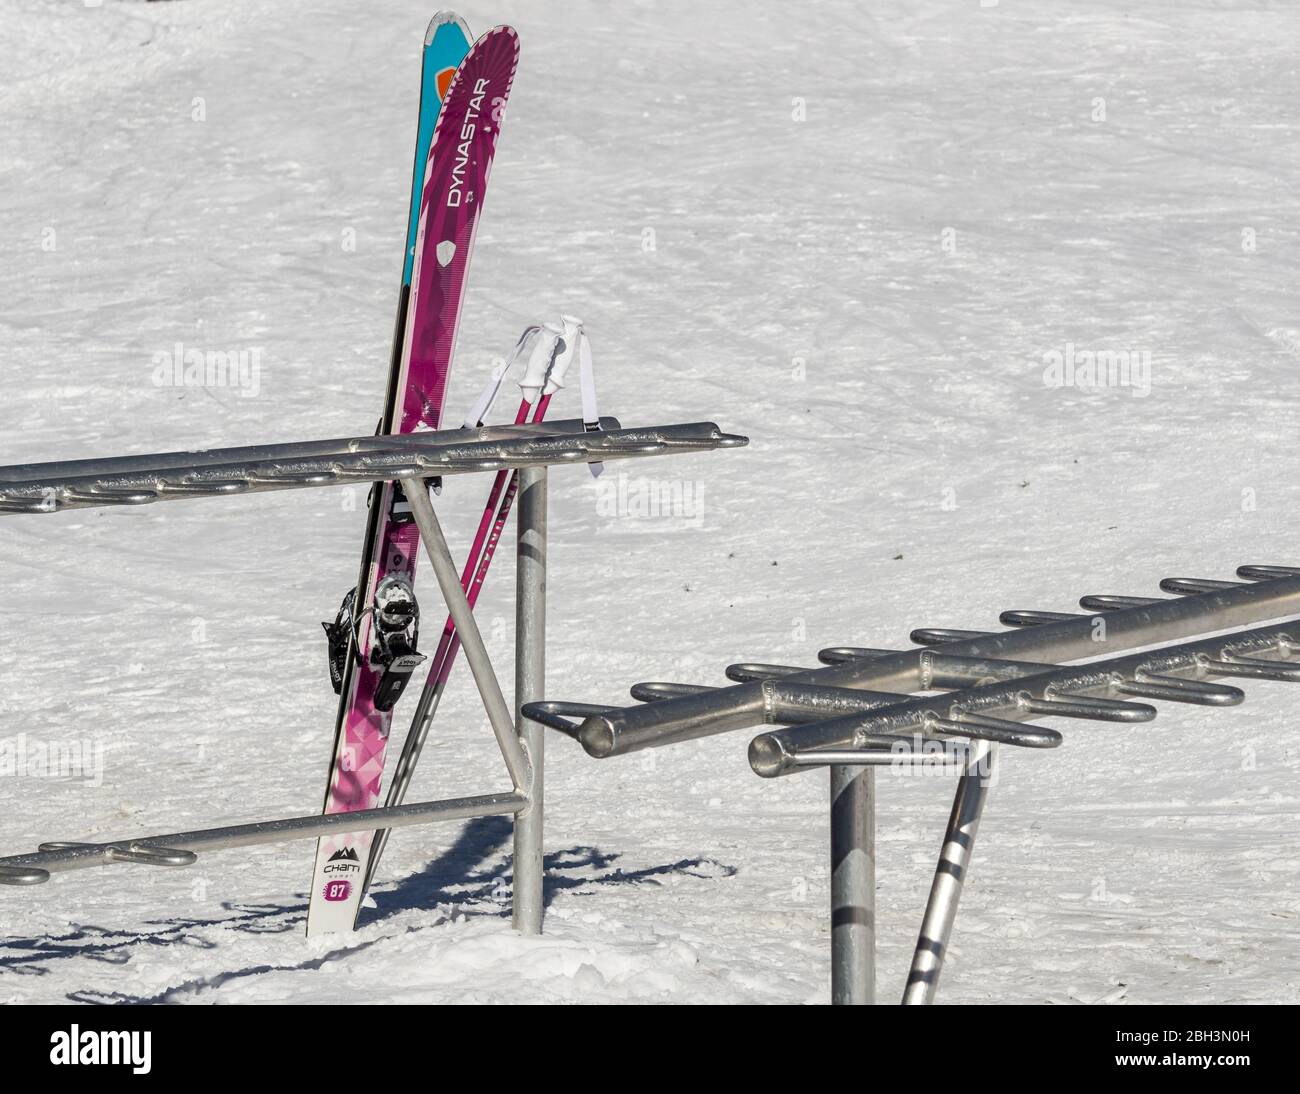 FAIRMONT HOT SPRINGS, CANADA - MARCH 16, 2020: skis on a stand in snow winter resort. Stock Photo